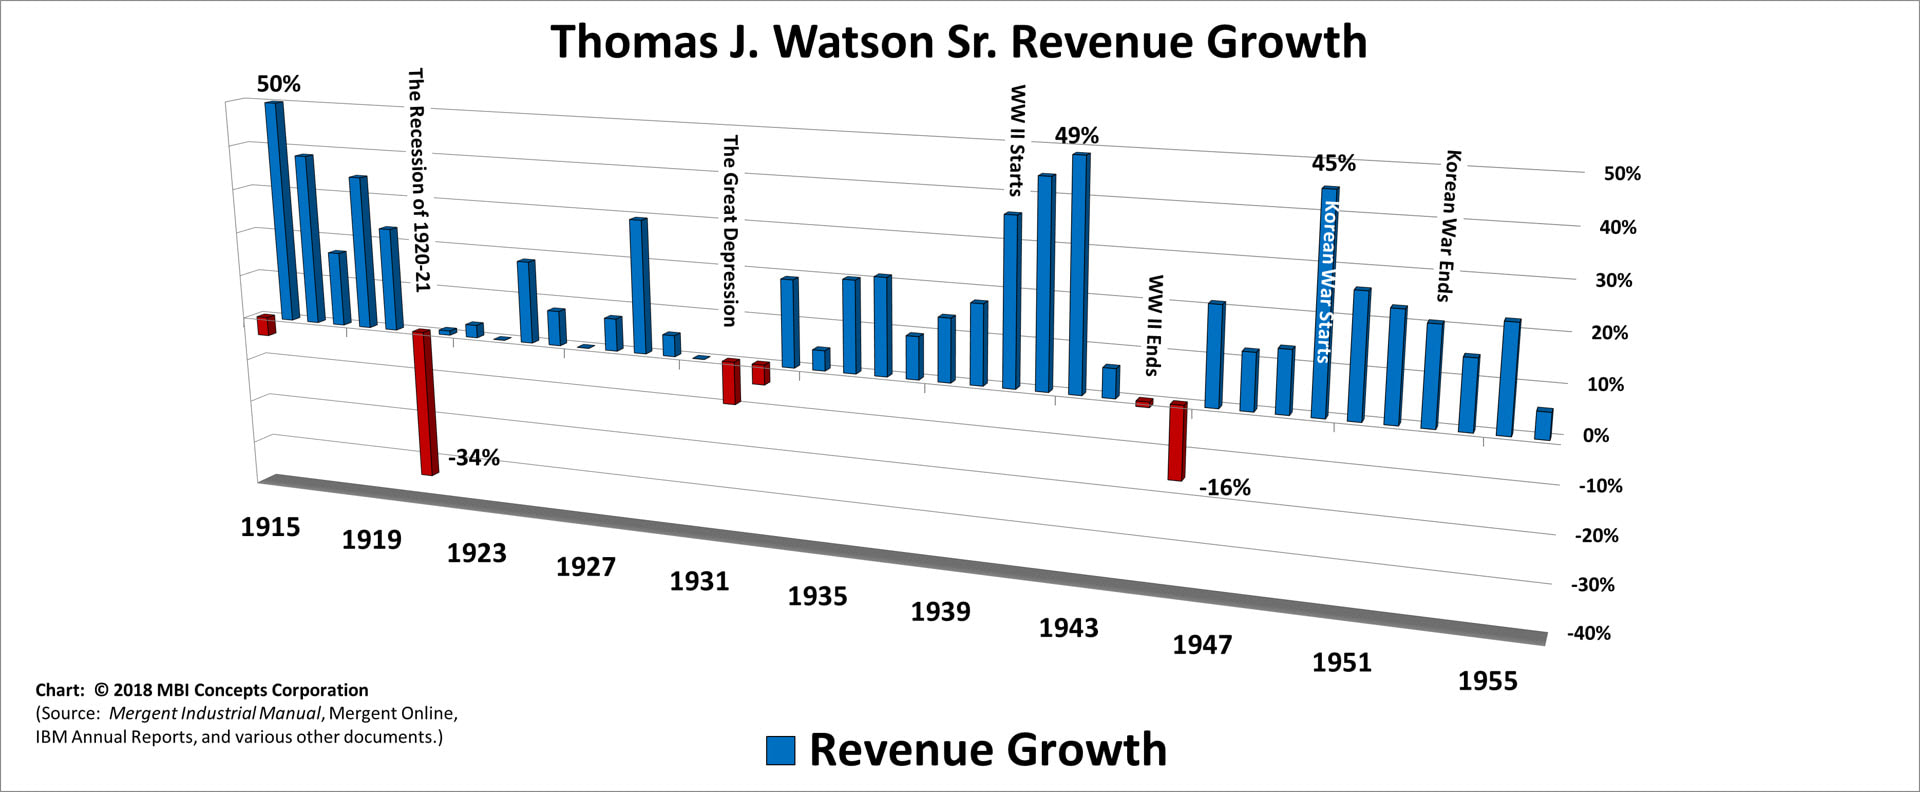 A color bar chart showing IBM's yearly revenue growth from 1915 to 1955 for Thomas J. Watson Sr.